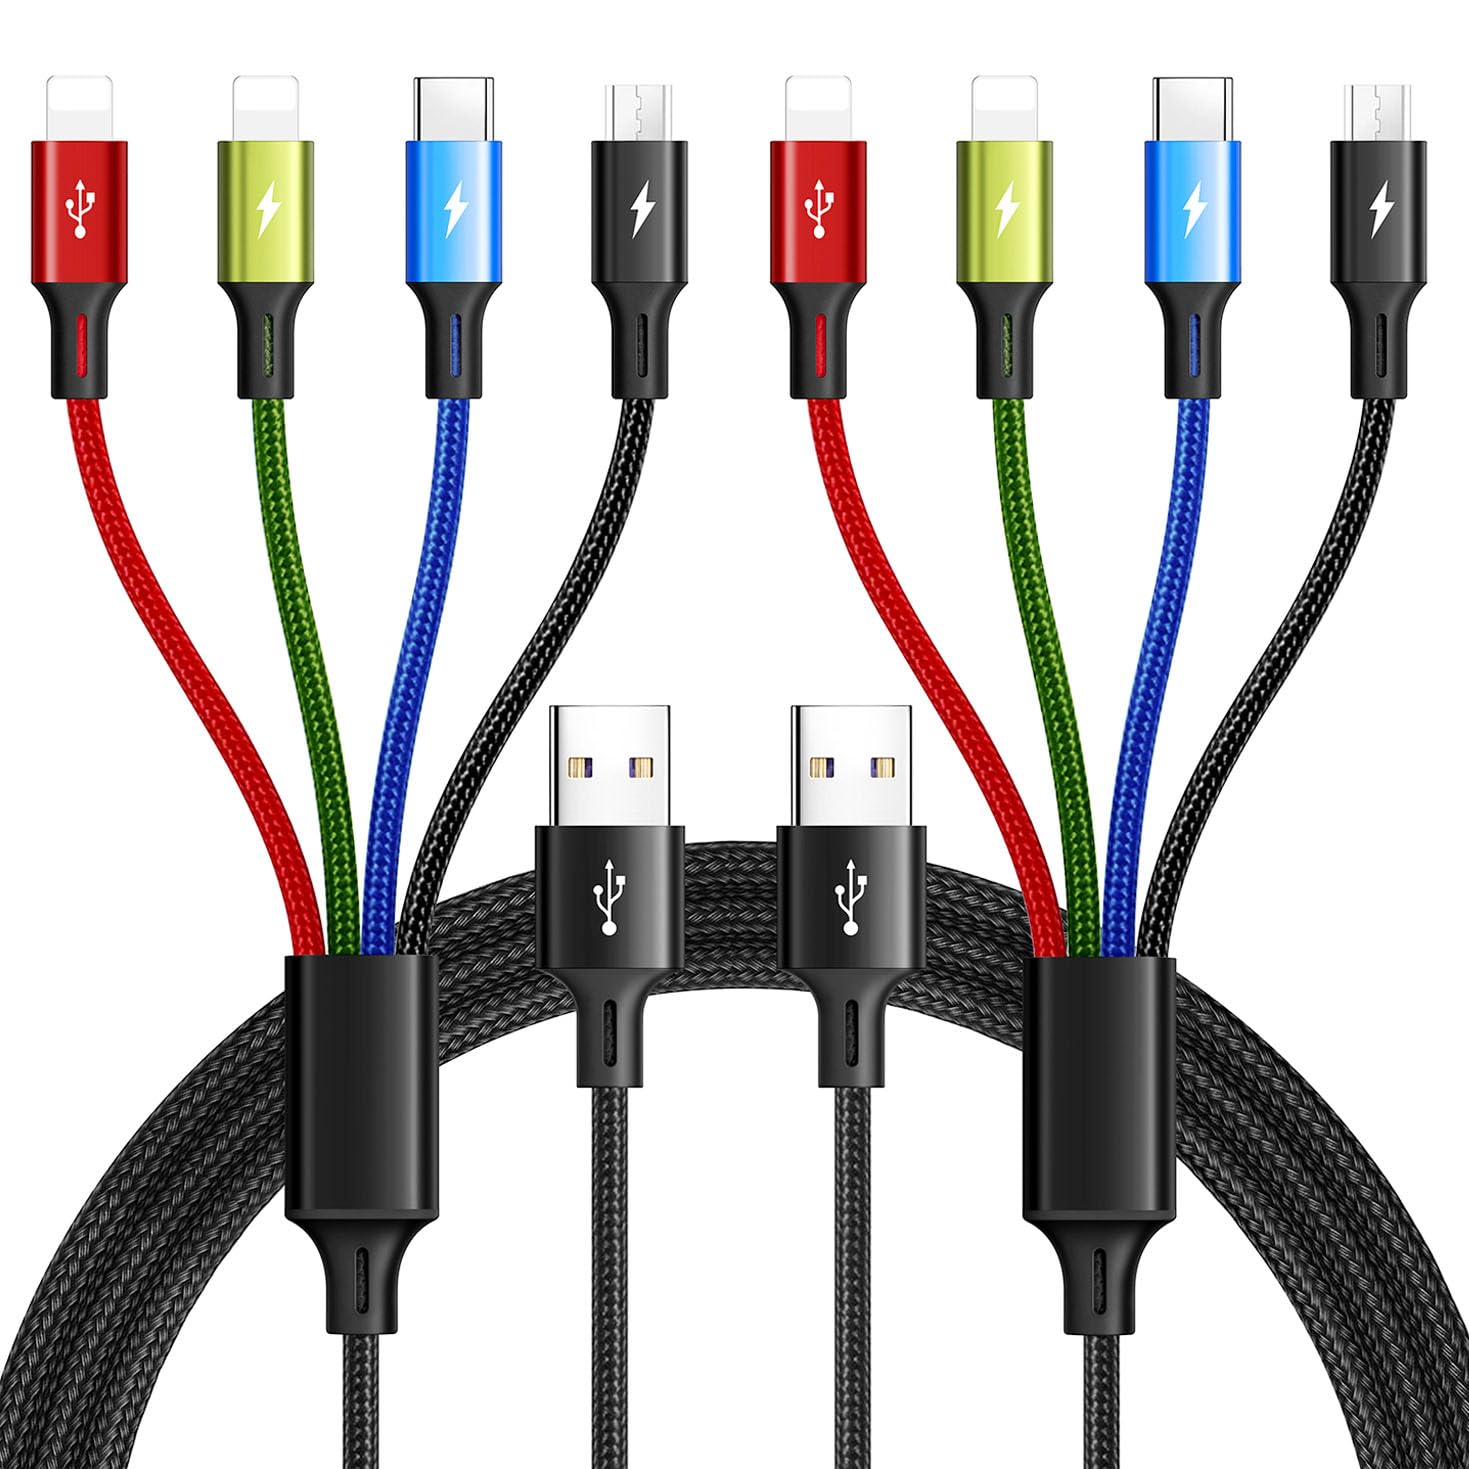 Multi Charging Cable,3.5A Multi Charger Cable,Braided 4 in 1 Charging Cable,Multi USB Cable, Fast Charging Cord with IP/ - Click Image to Close